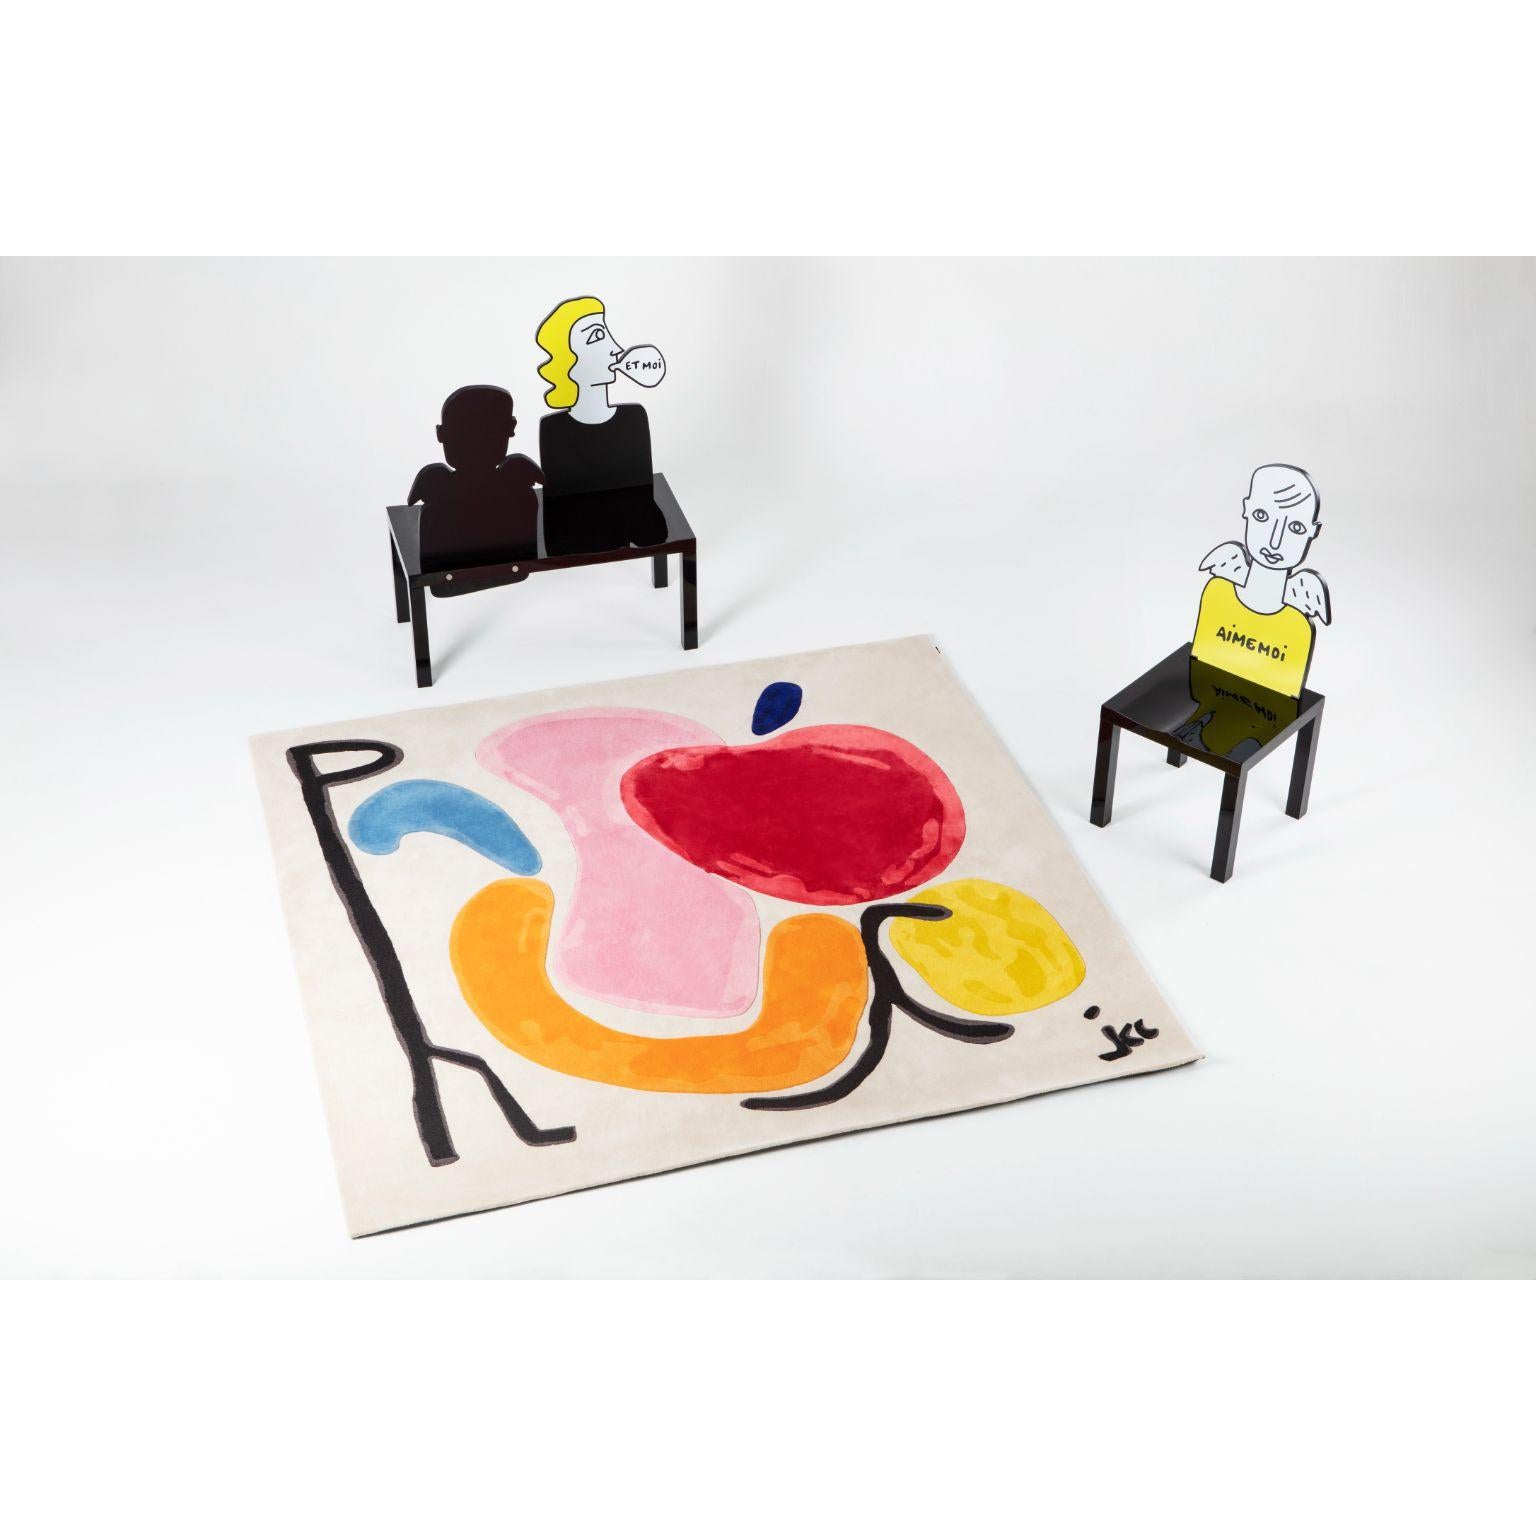 Post-Modern Candy Darling Rug by Jean-Charles de Castelbajac For Sale